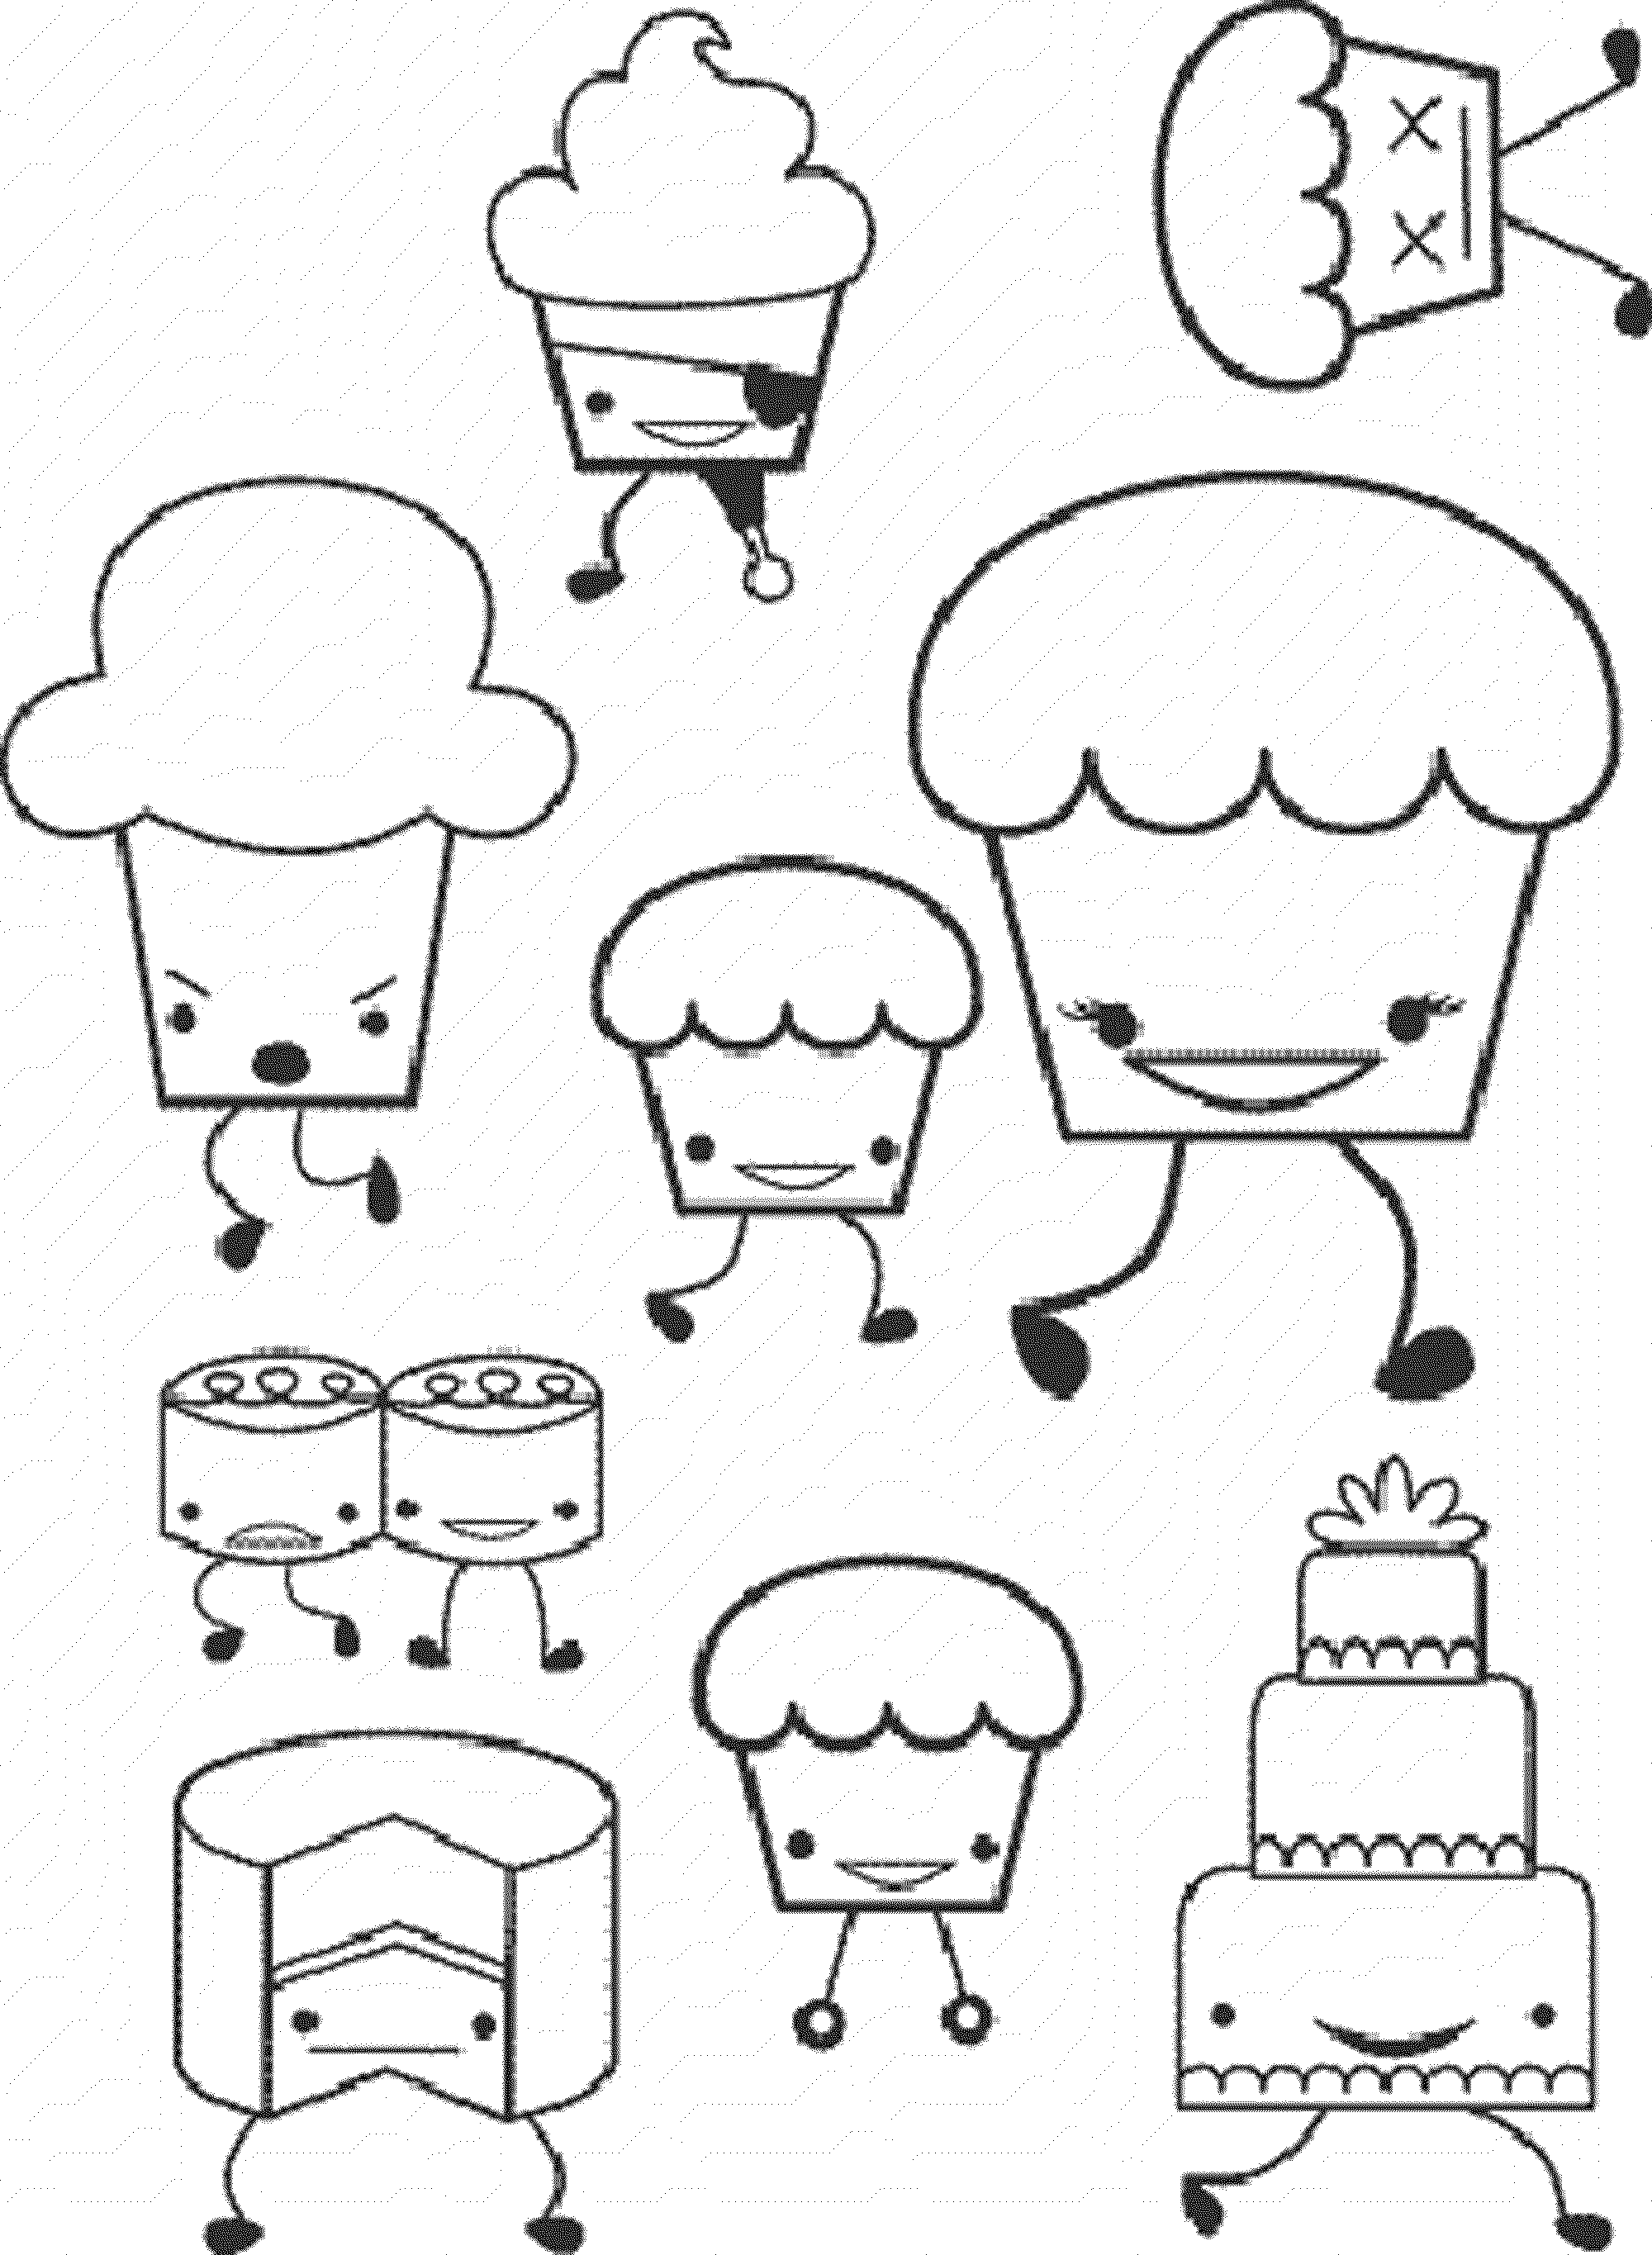 cupcake coloring pages to print - Printable Kids Colouring Pages